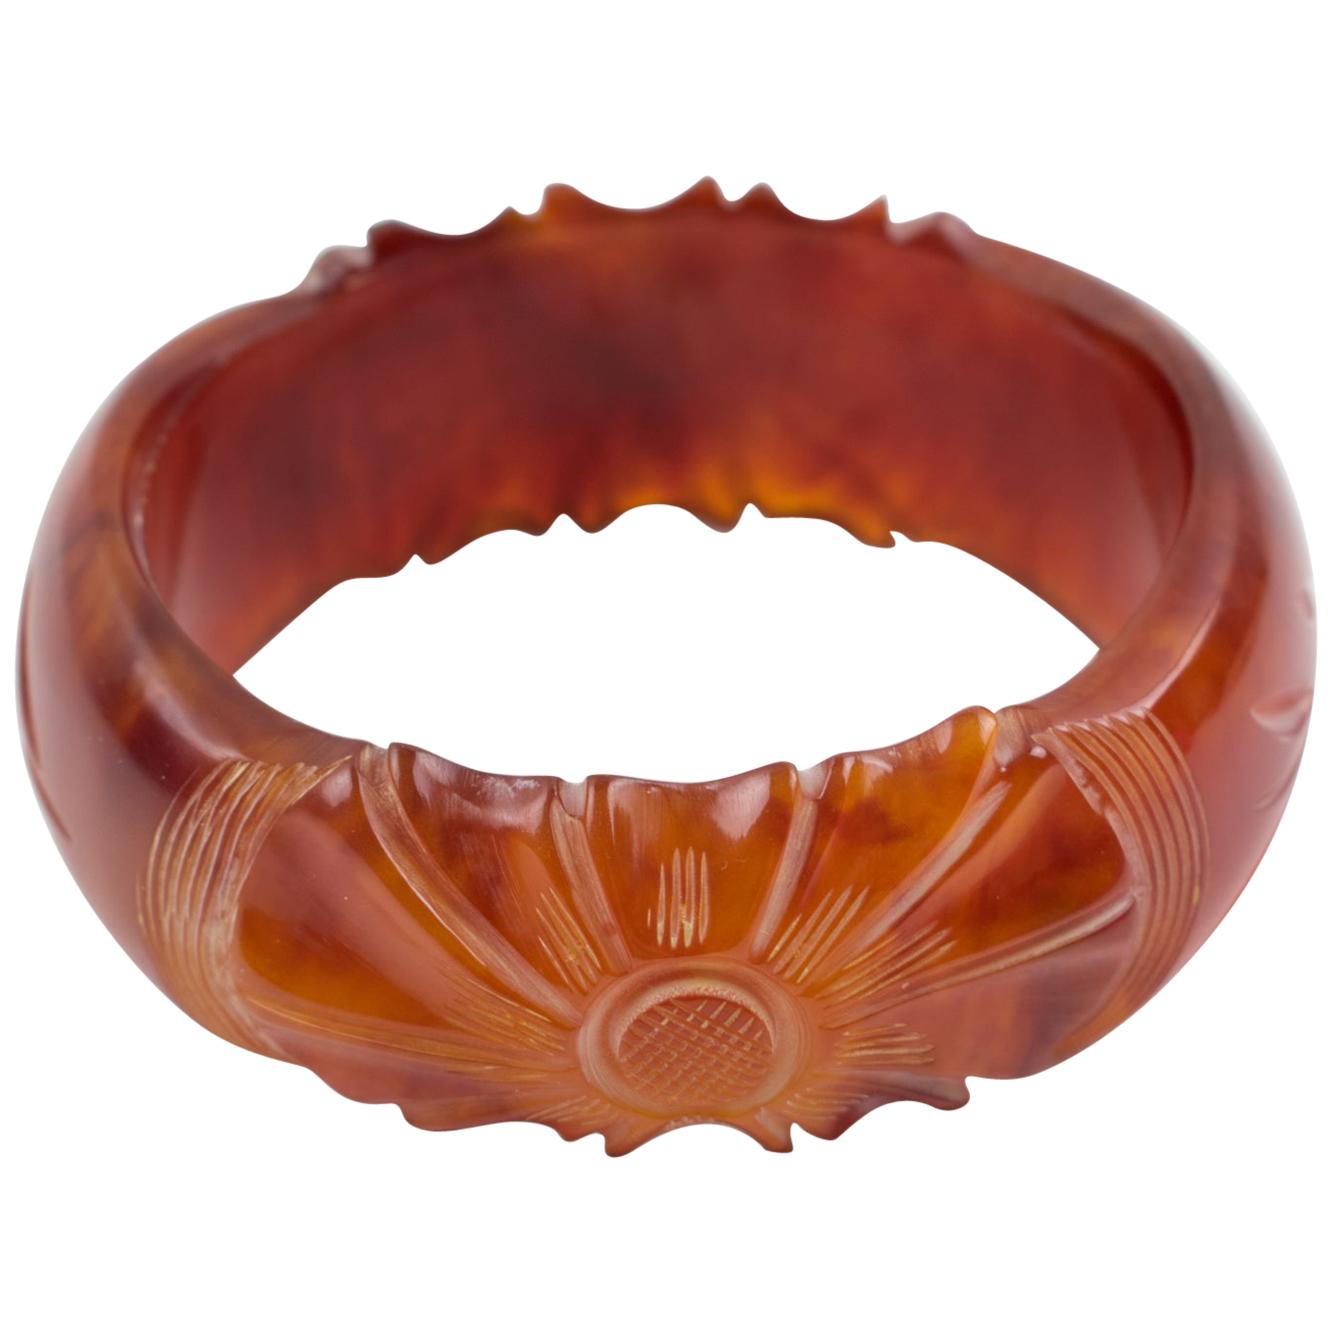 This stunning red tea marble Bakelite carved bracelet bangle features a chunky domed shape with deep floral carving. Its bold and beautiful design displays two large sculpted flowers with leaves in between and a thick-walled pattern. The